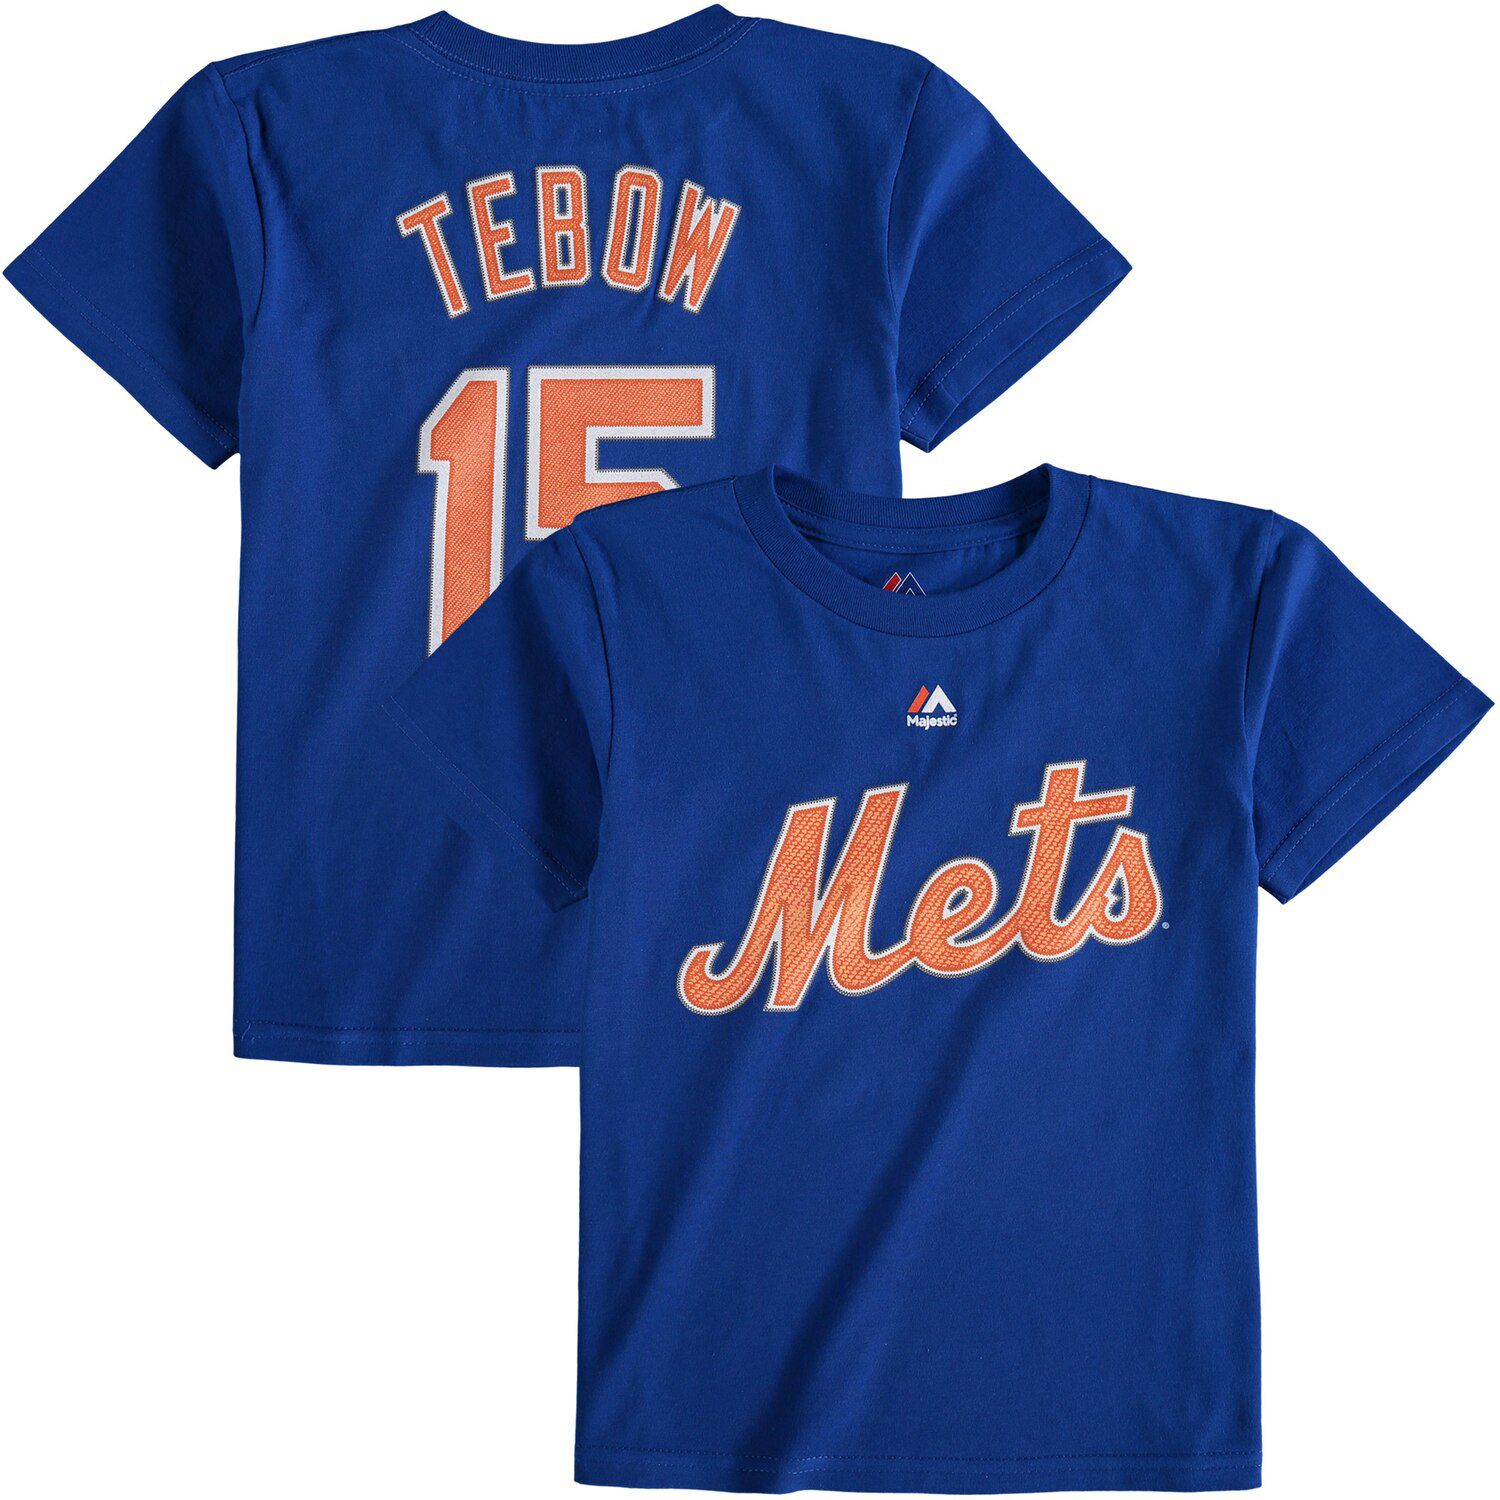 mets tebow t shirt